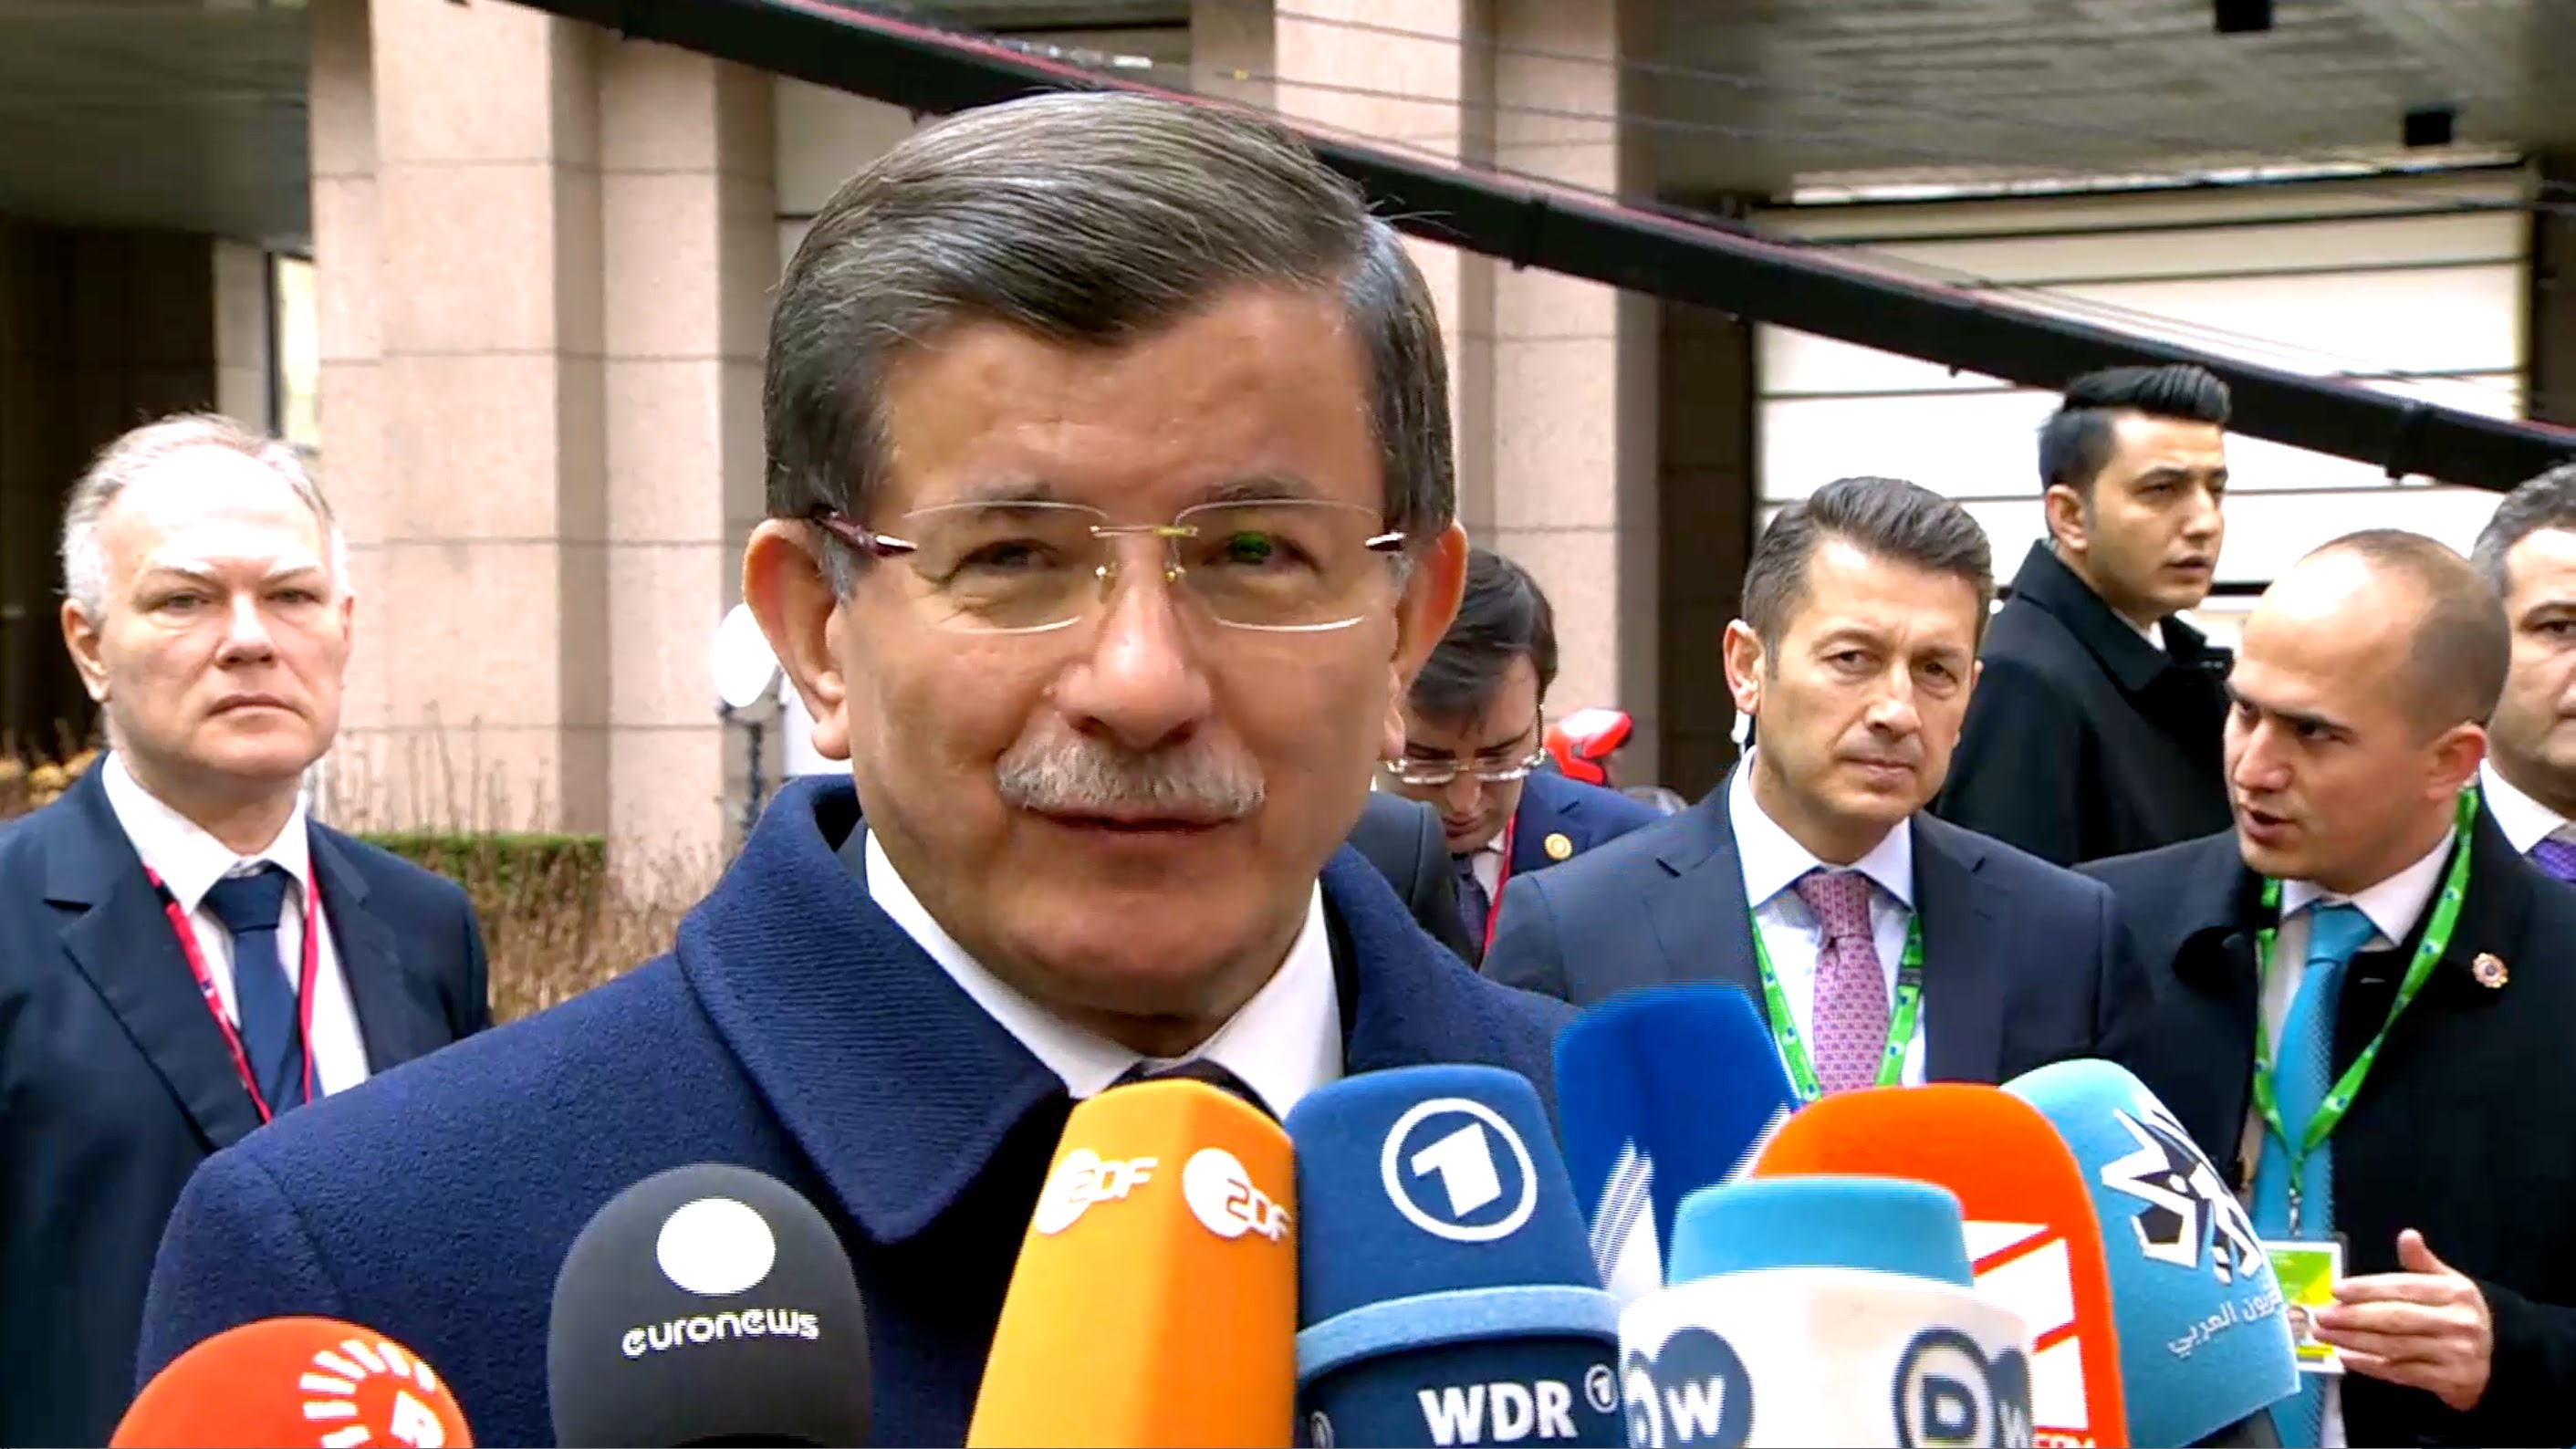 Ahmet Davutoğlu: “Turkey is ready to work with the EU and is ready to be member of the EU as well”